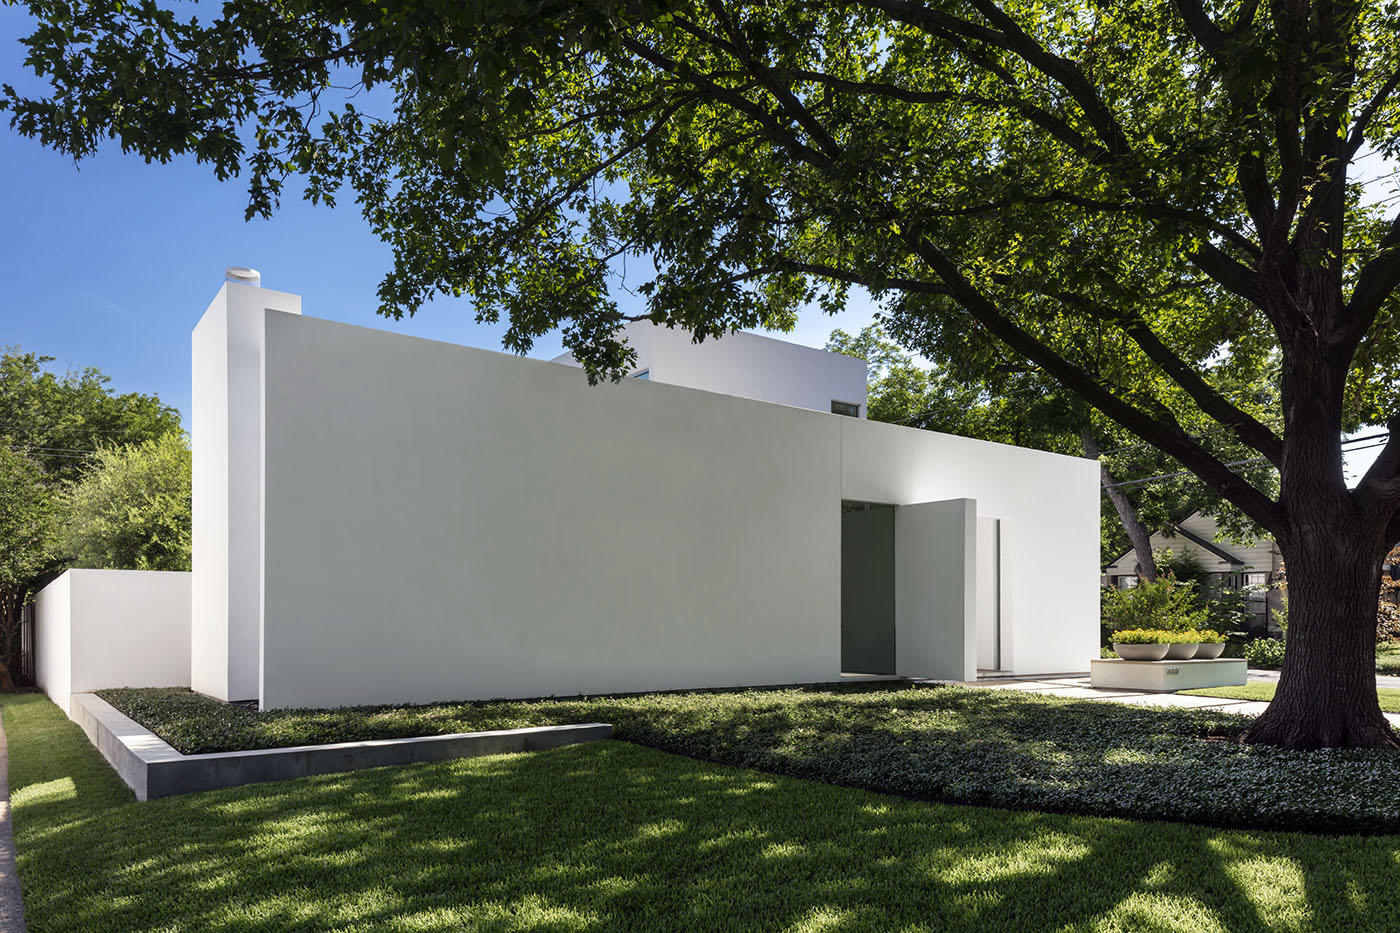 Clayton Ave Residence - 2019 | Mark Dilworth, AIA - Morrison Dilworth & Walls